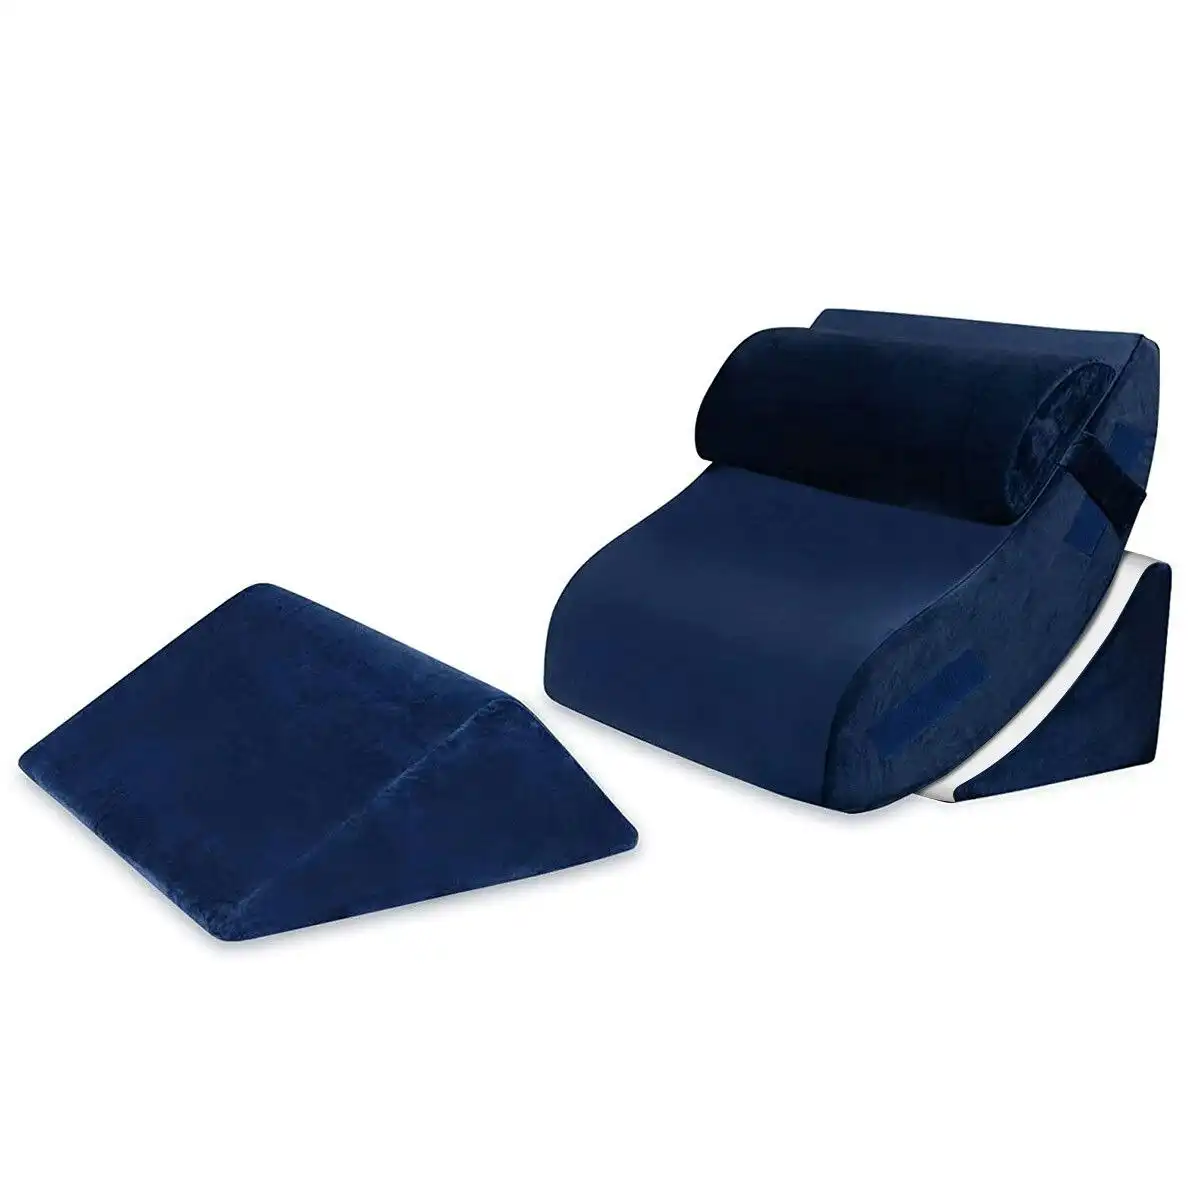 Ausway 4 Pcs Wedge Pillow Set Bed Cushion Memory Foam Head and Back Support Adjustable Navy Blue